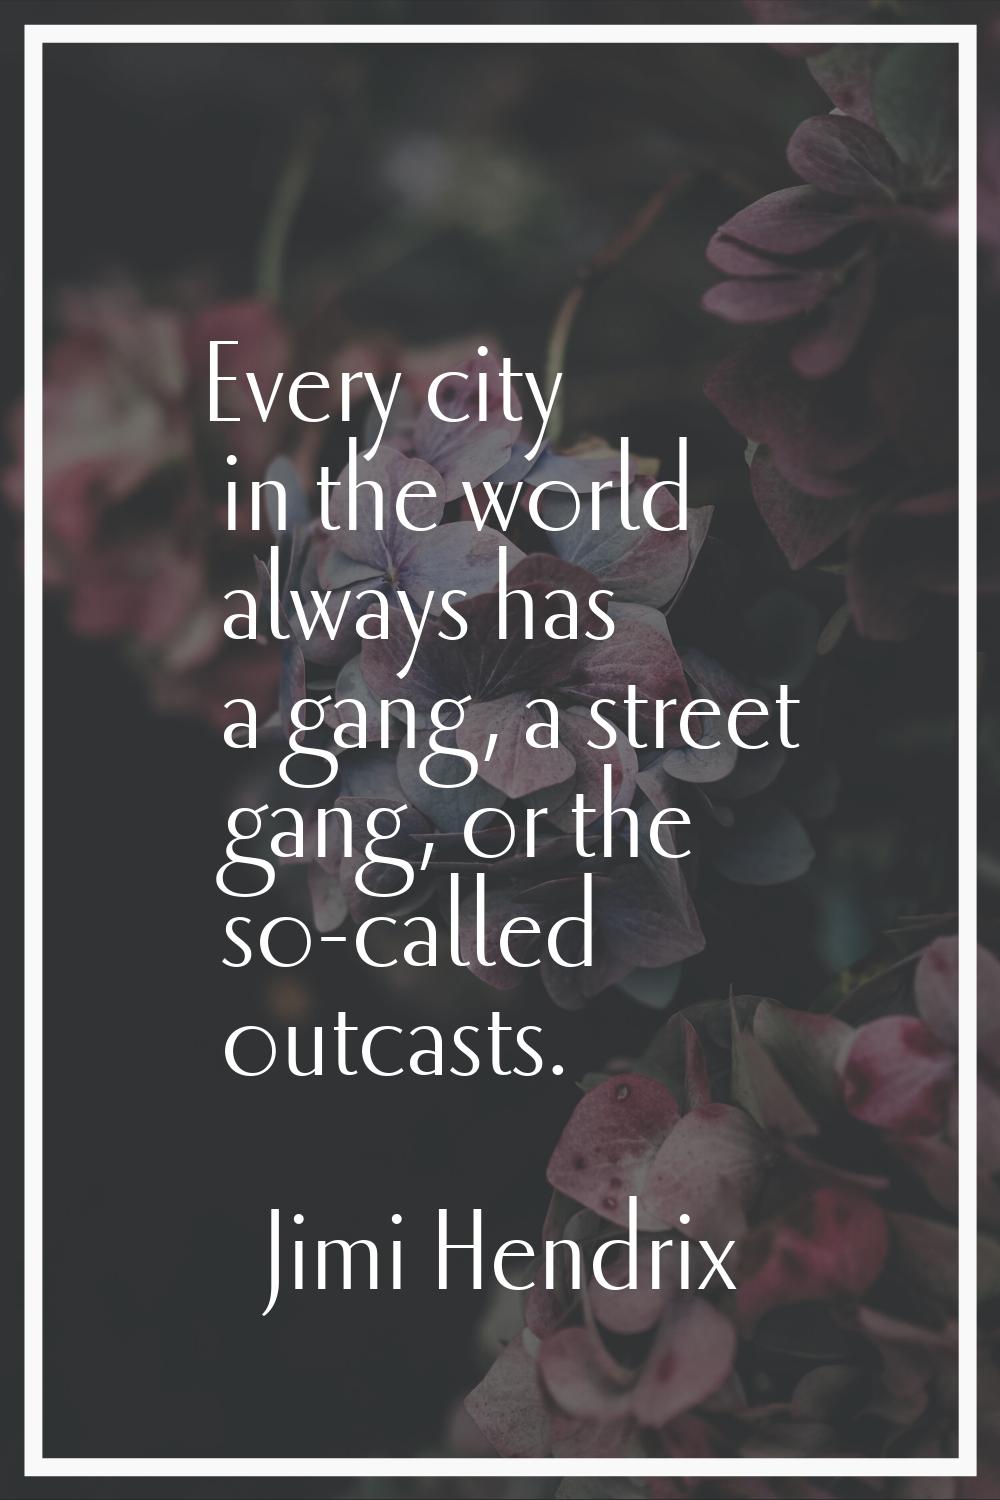 Every city in the world always has a gang, a street gang, or the so-called outcasts.